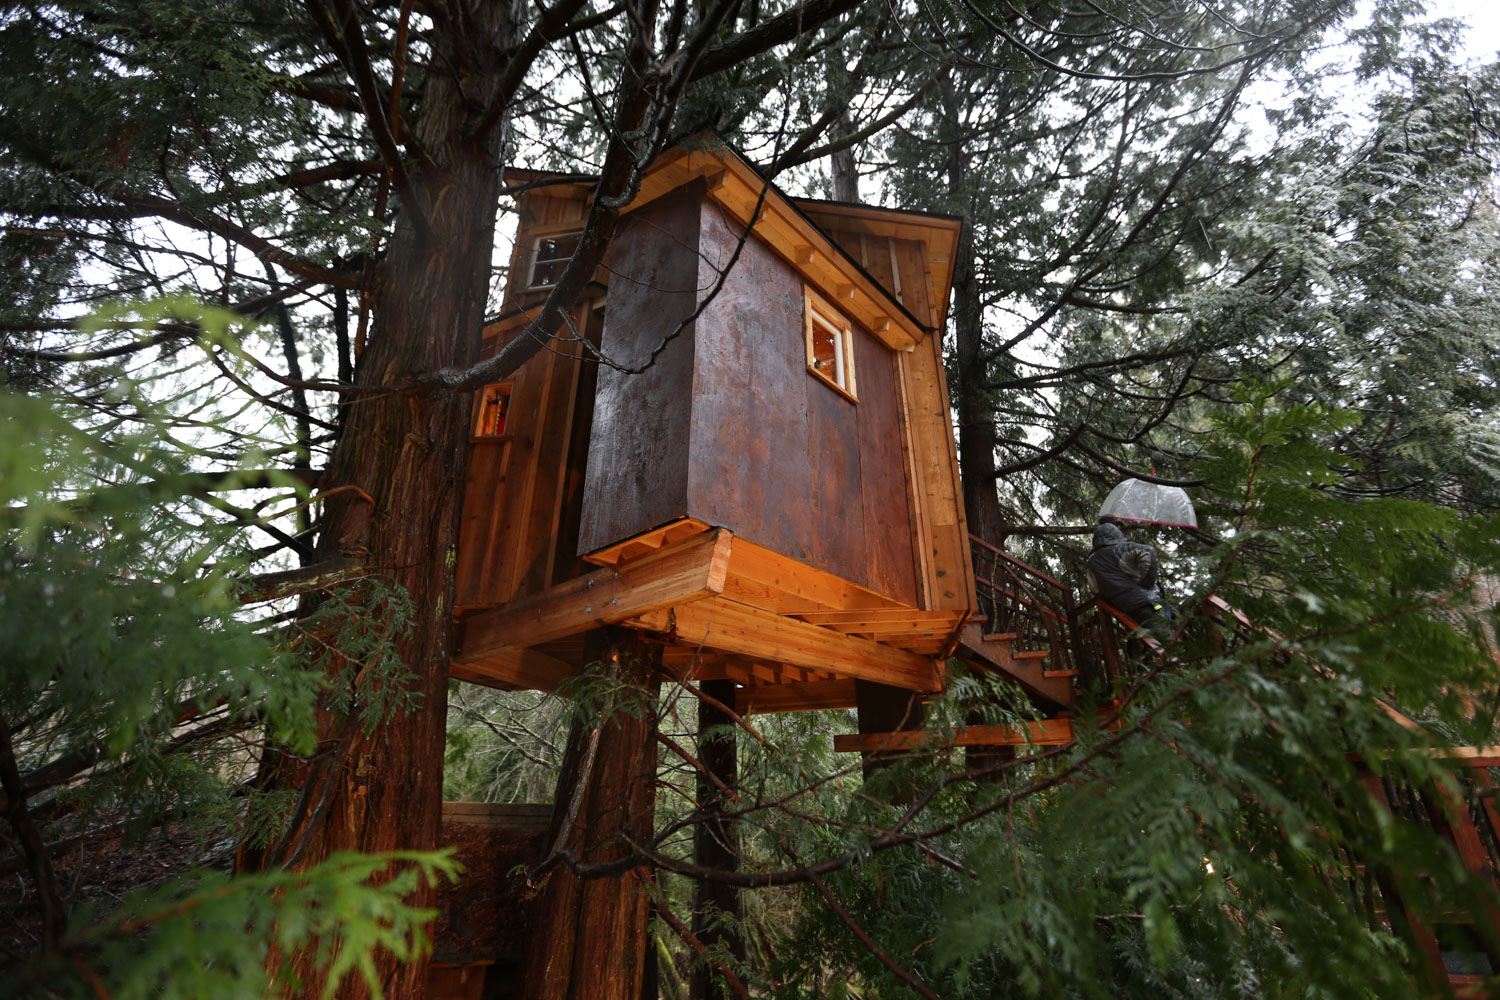  Nelson treehouse recording studio side view 